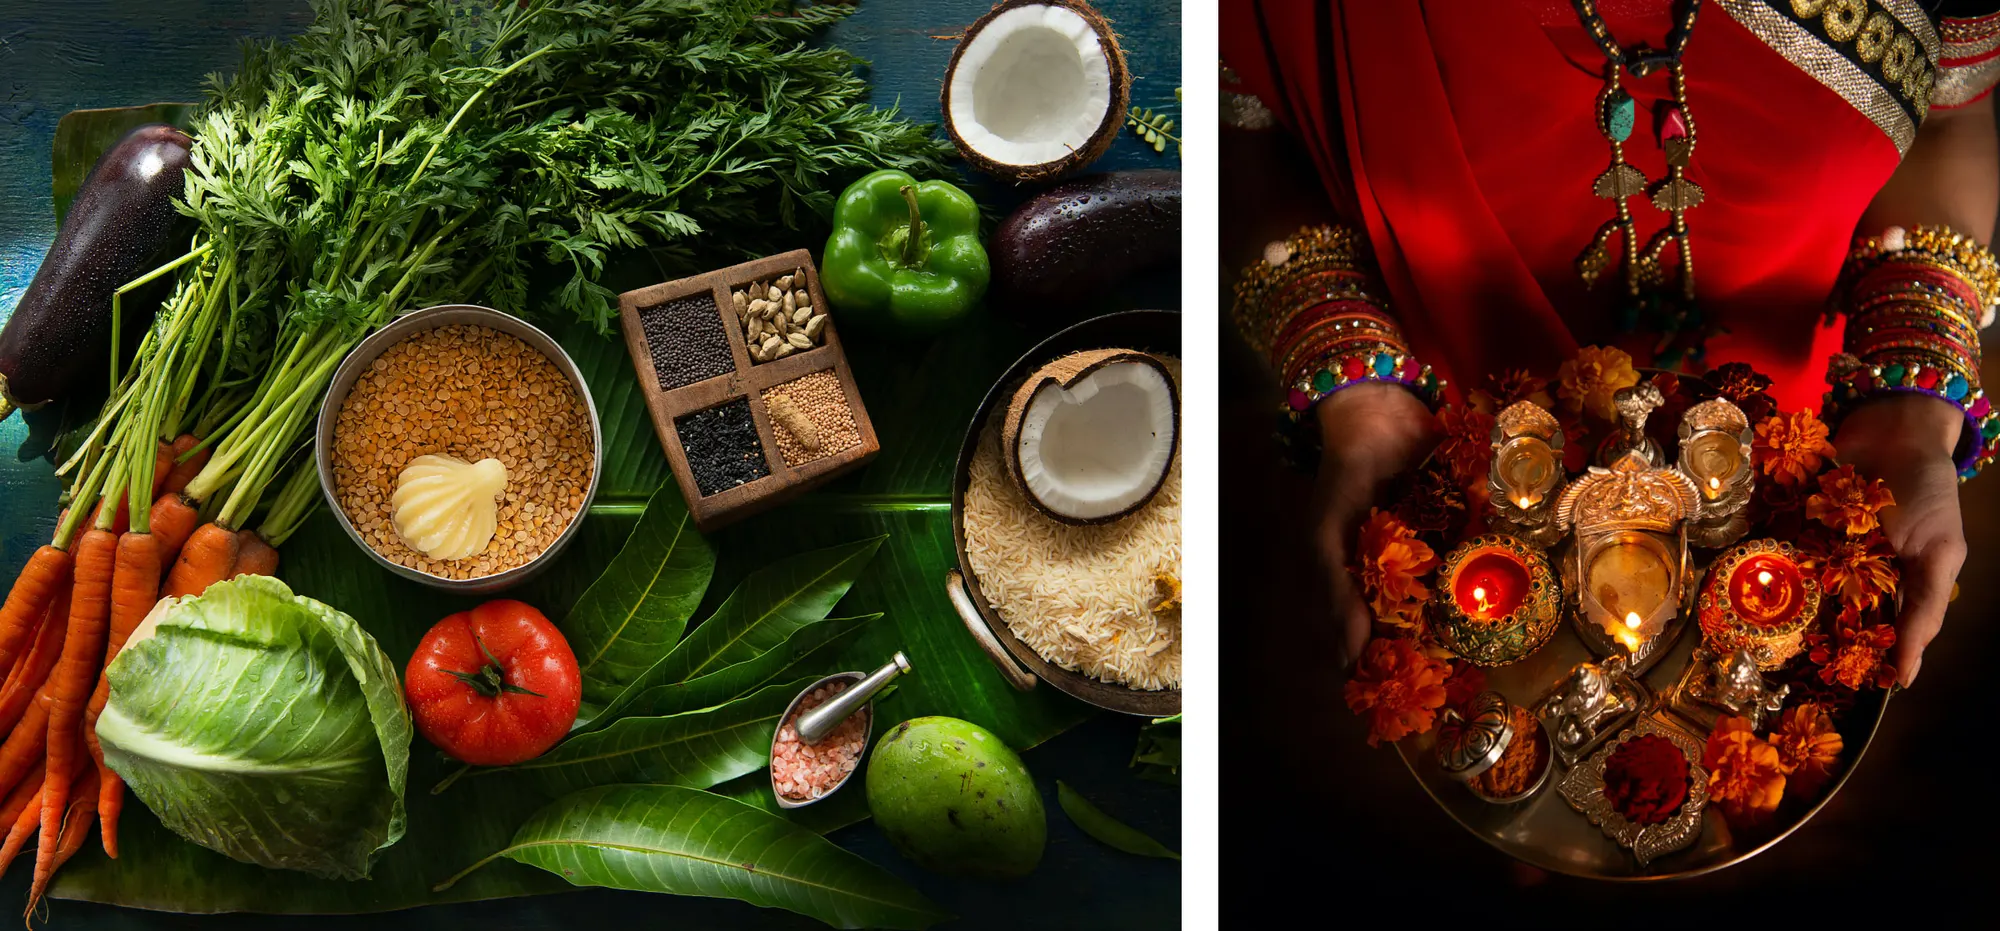 Images taken by Simi Jois of food and spices. 